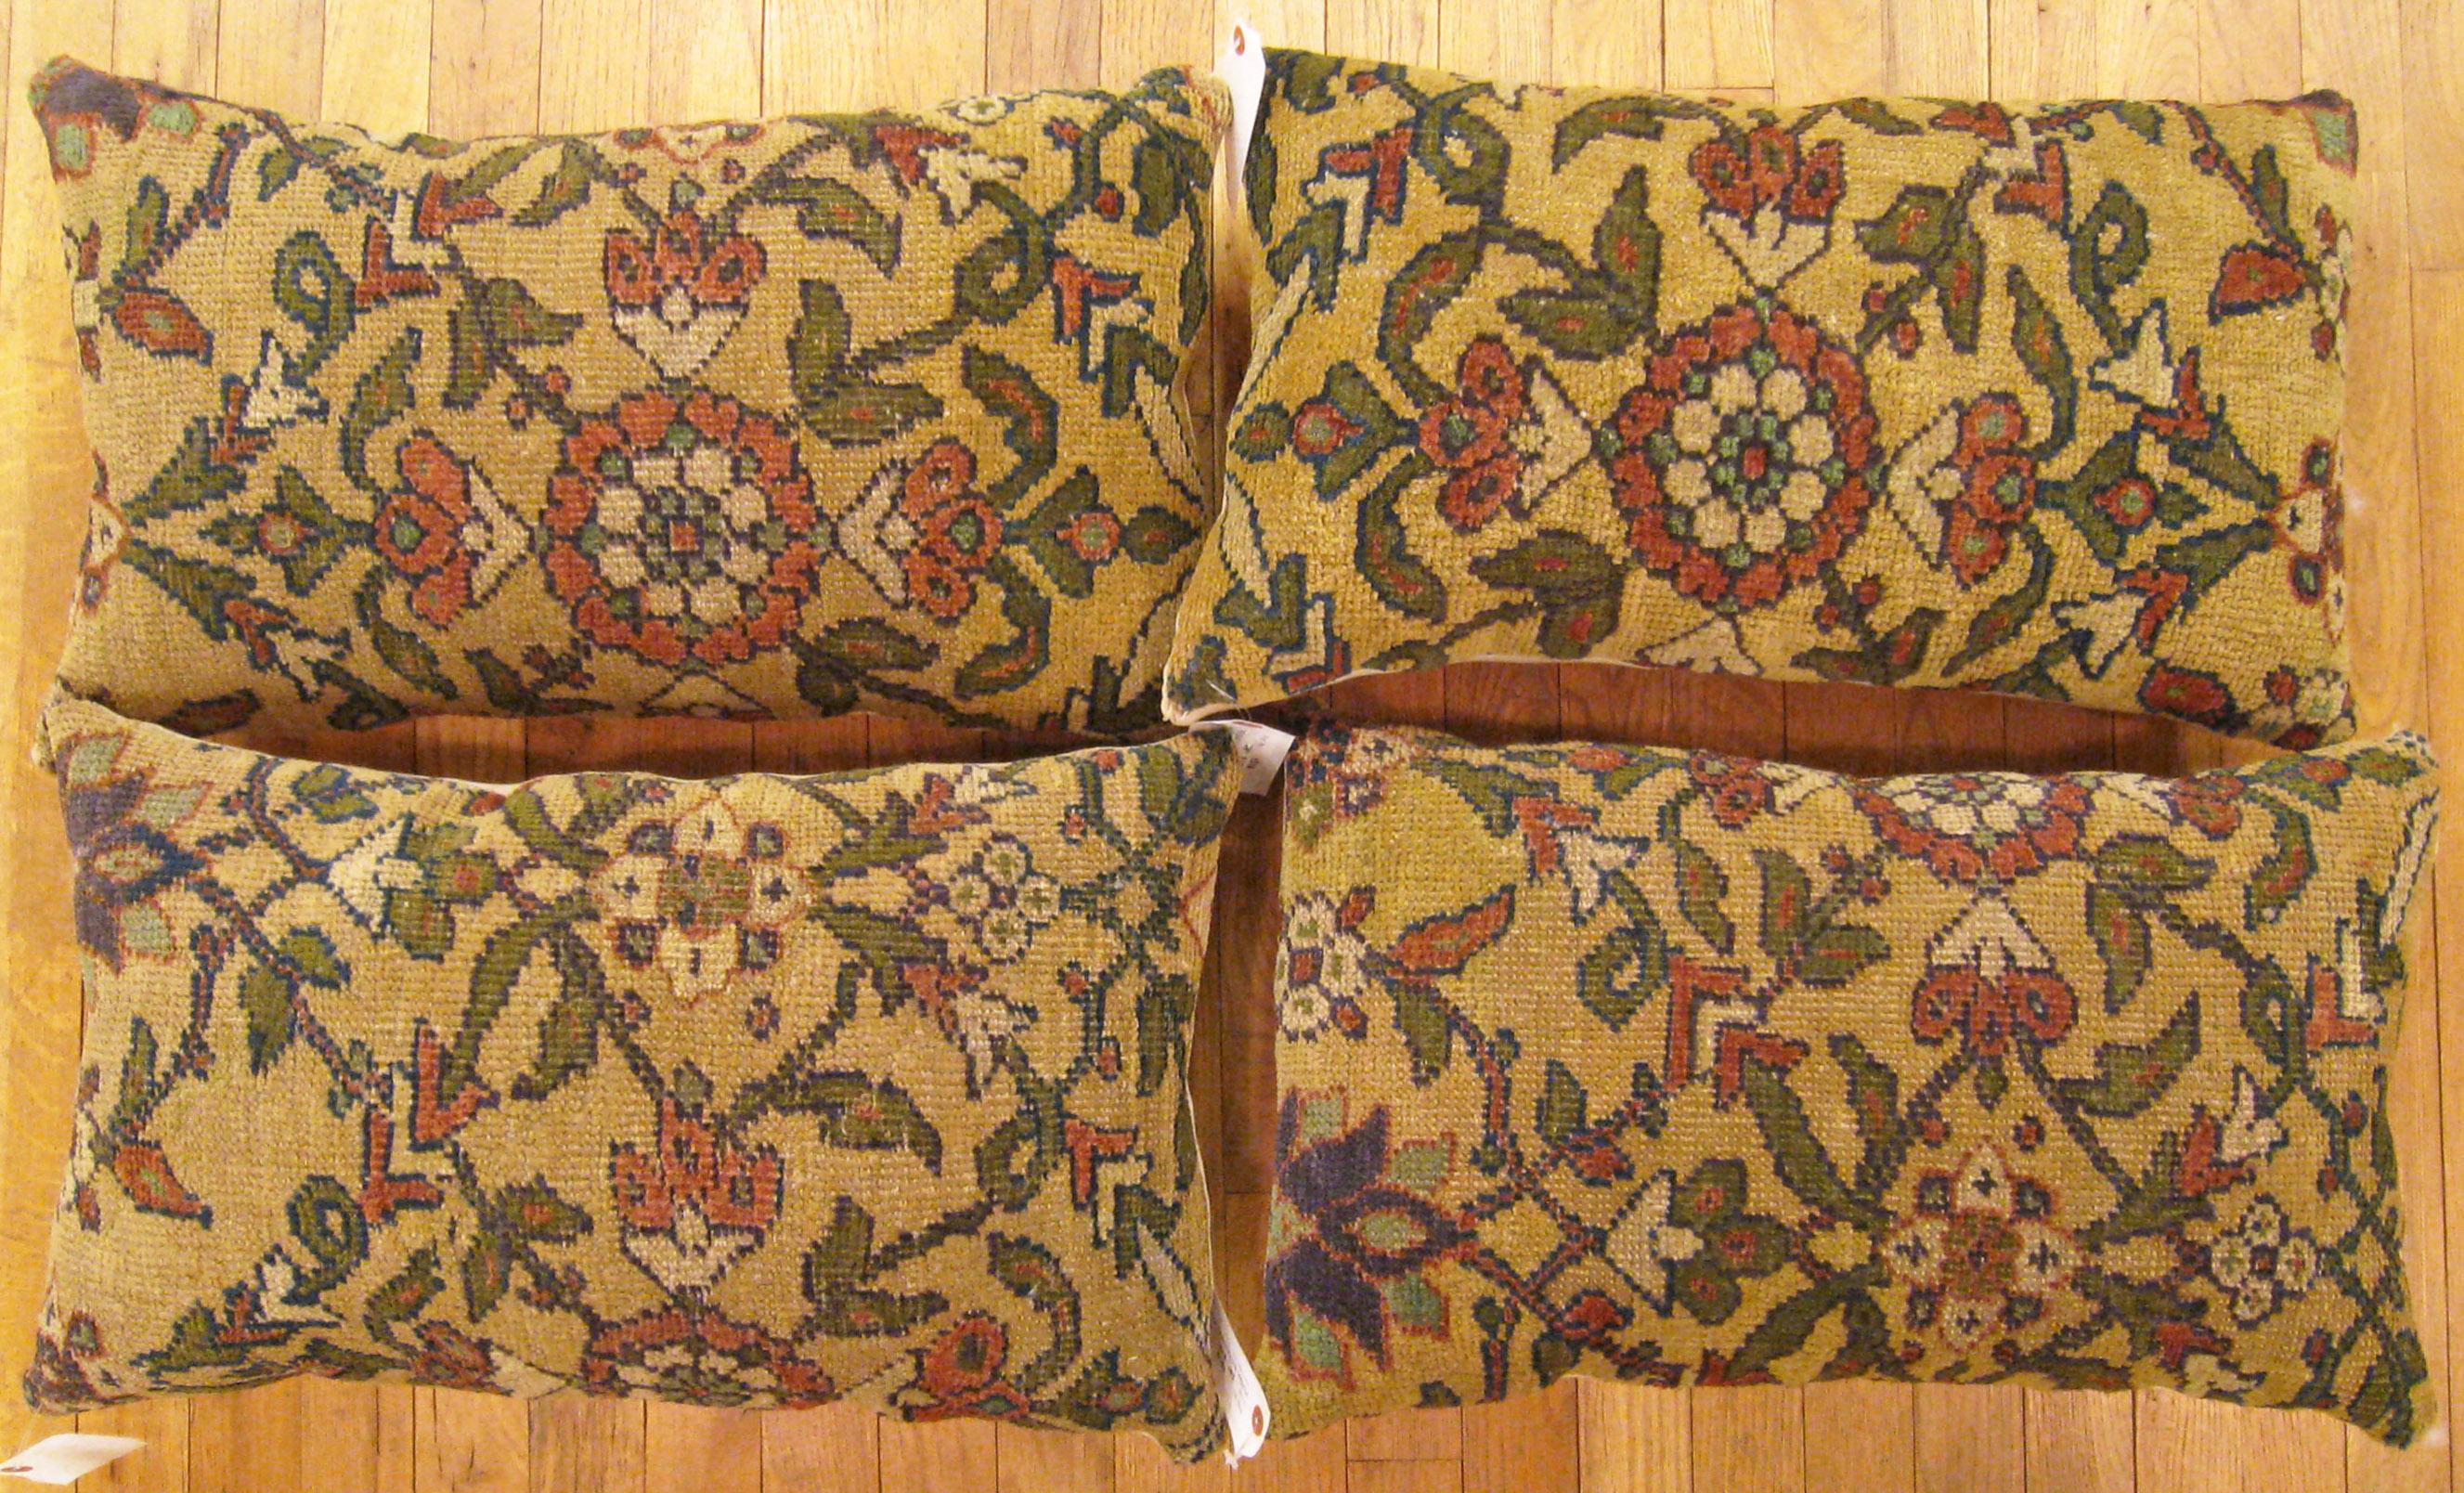 A set of antique Persian Sultanabad carpet pillows ; size 2'0” x 1'3” Each.

An antique decorative pillows with floral elements allover a cream central field, size 2'0” x 1'3” each. This lovely decorative pillow features an antique fabric of a